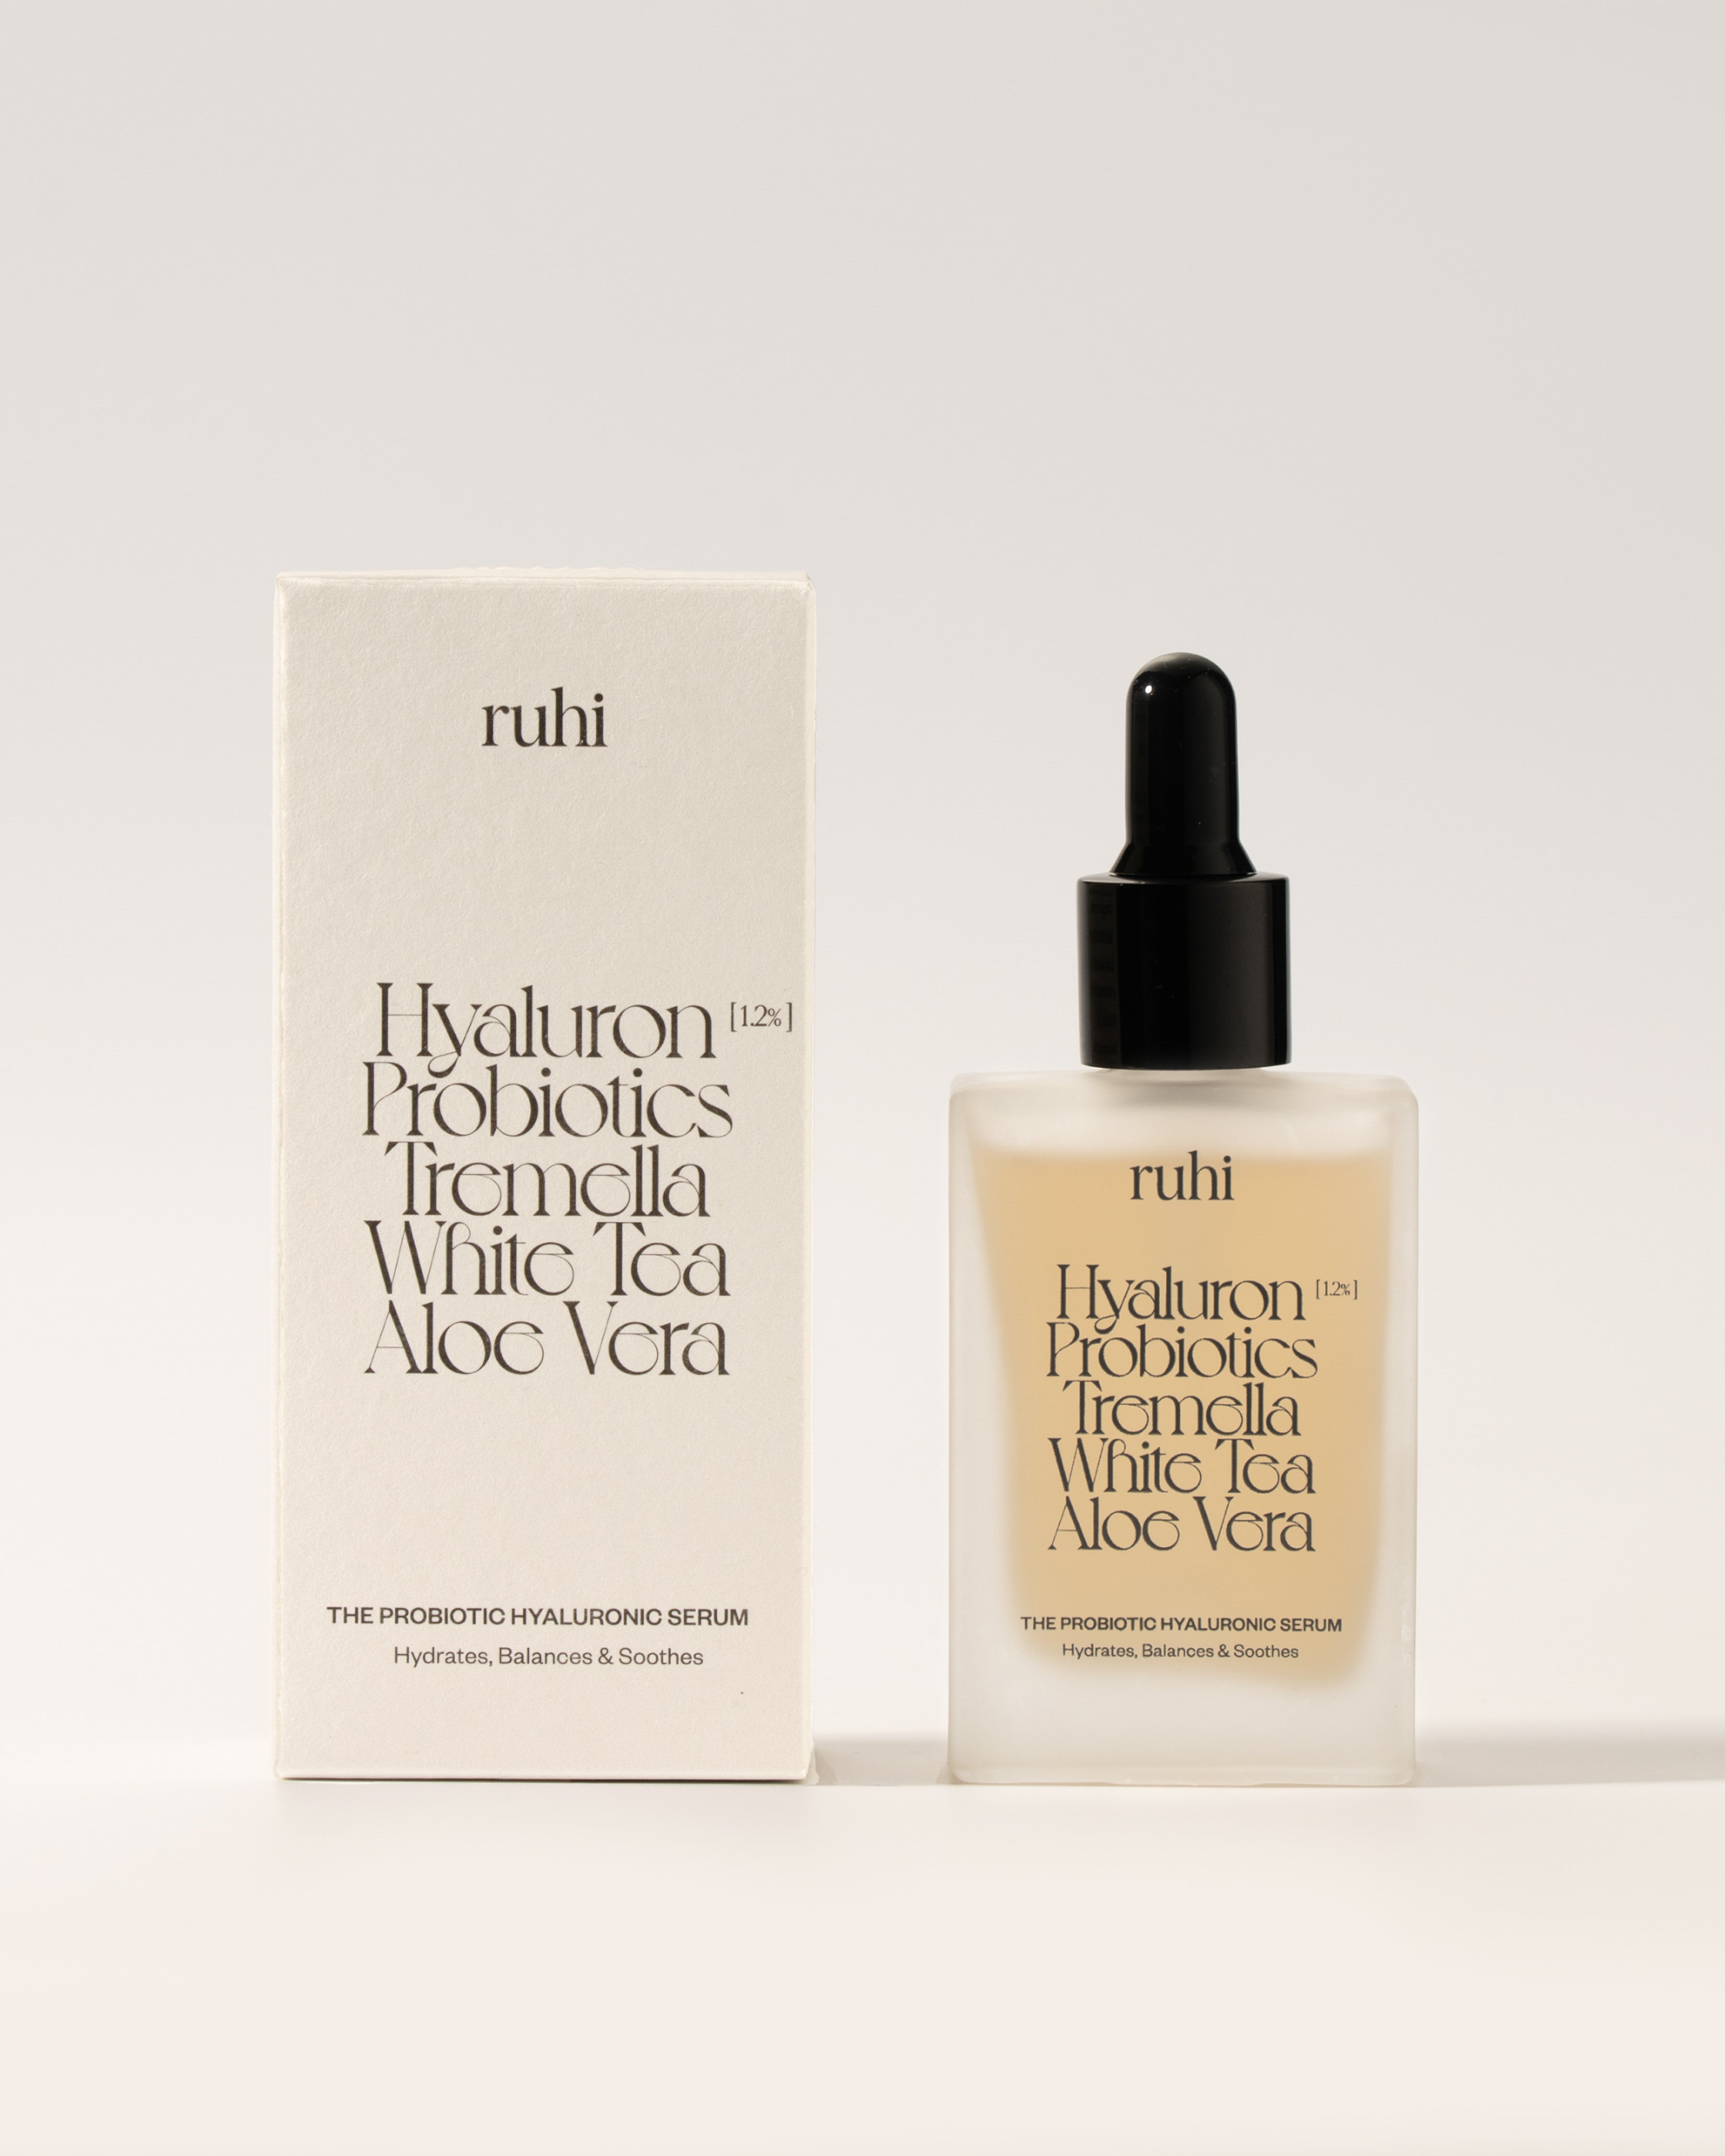 The Probiotic Hyaluronic Serum